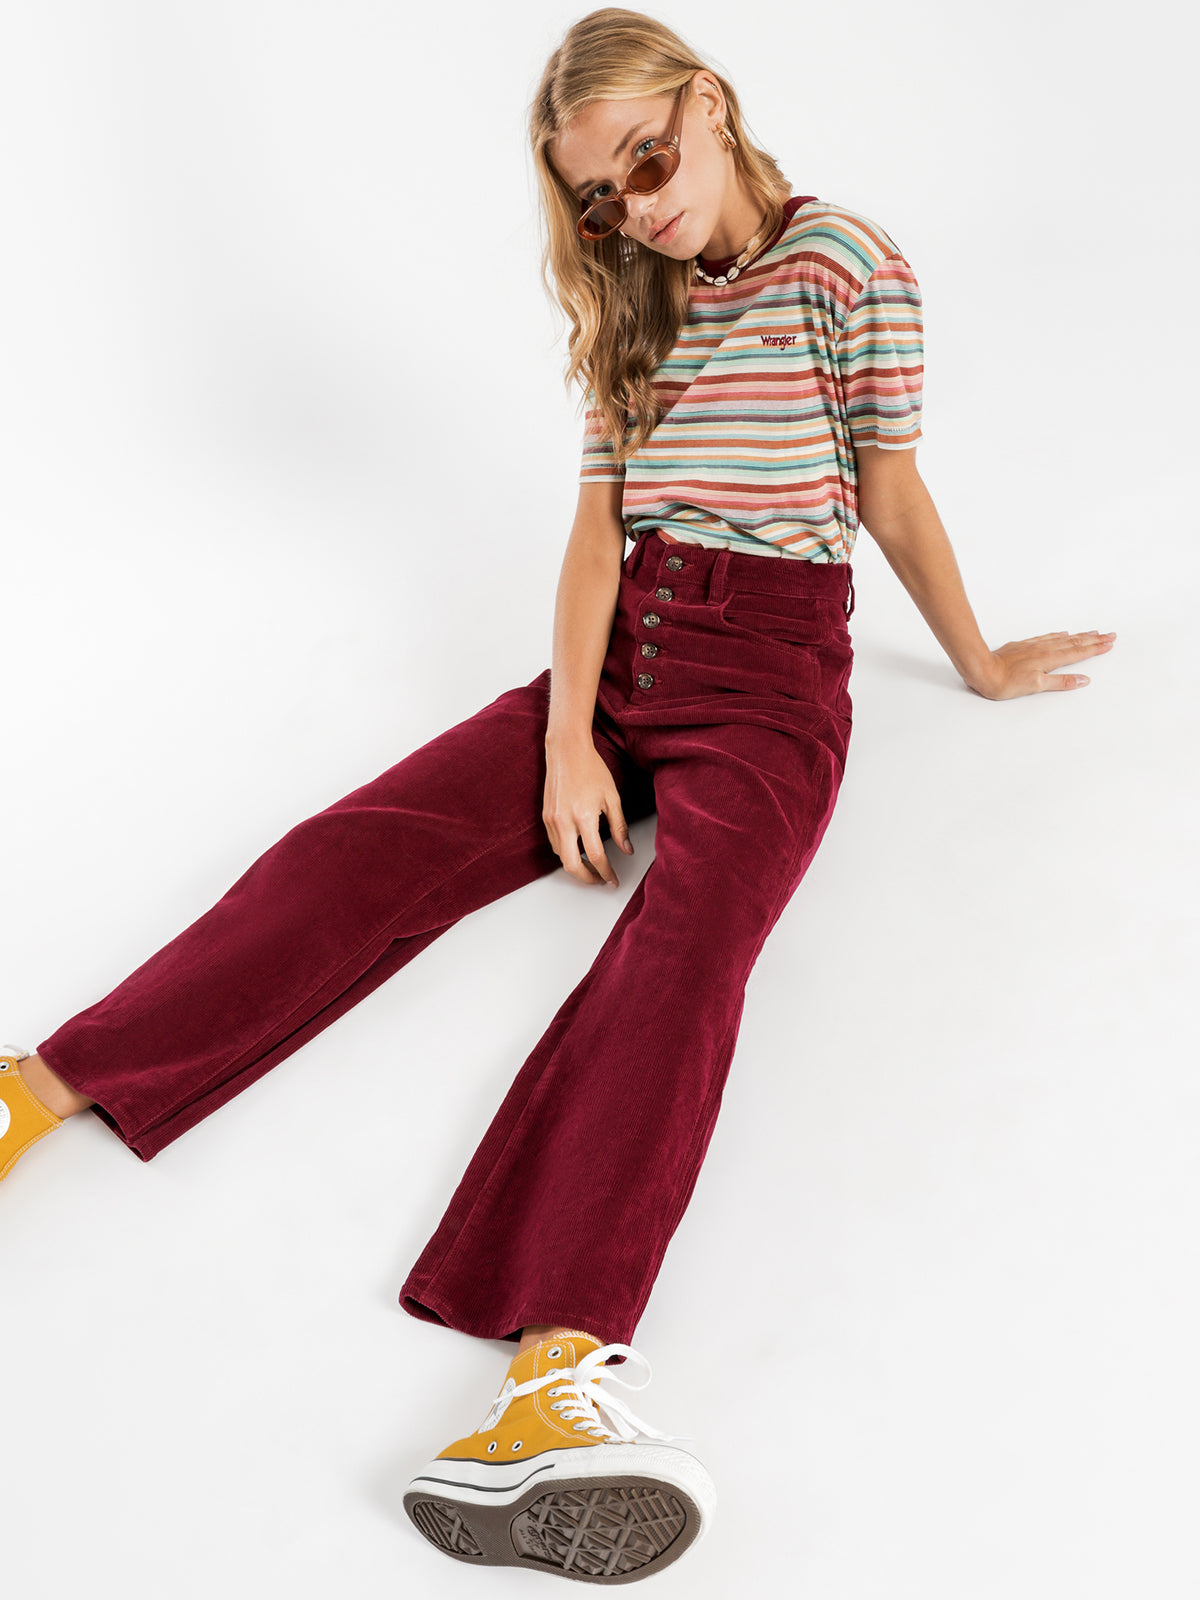 Hi Bells Cropped Jeans in Red Plum